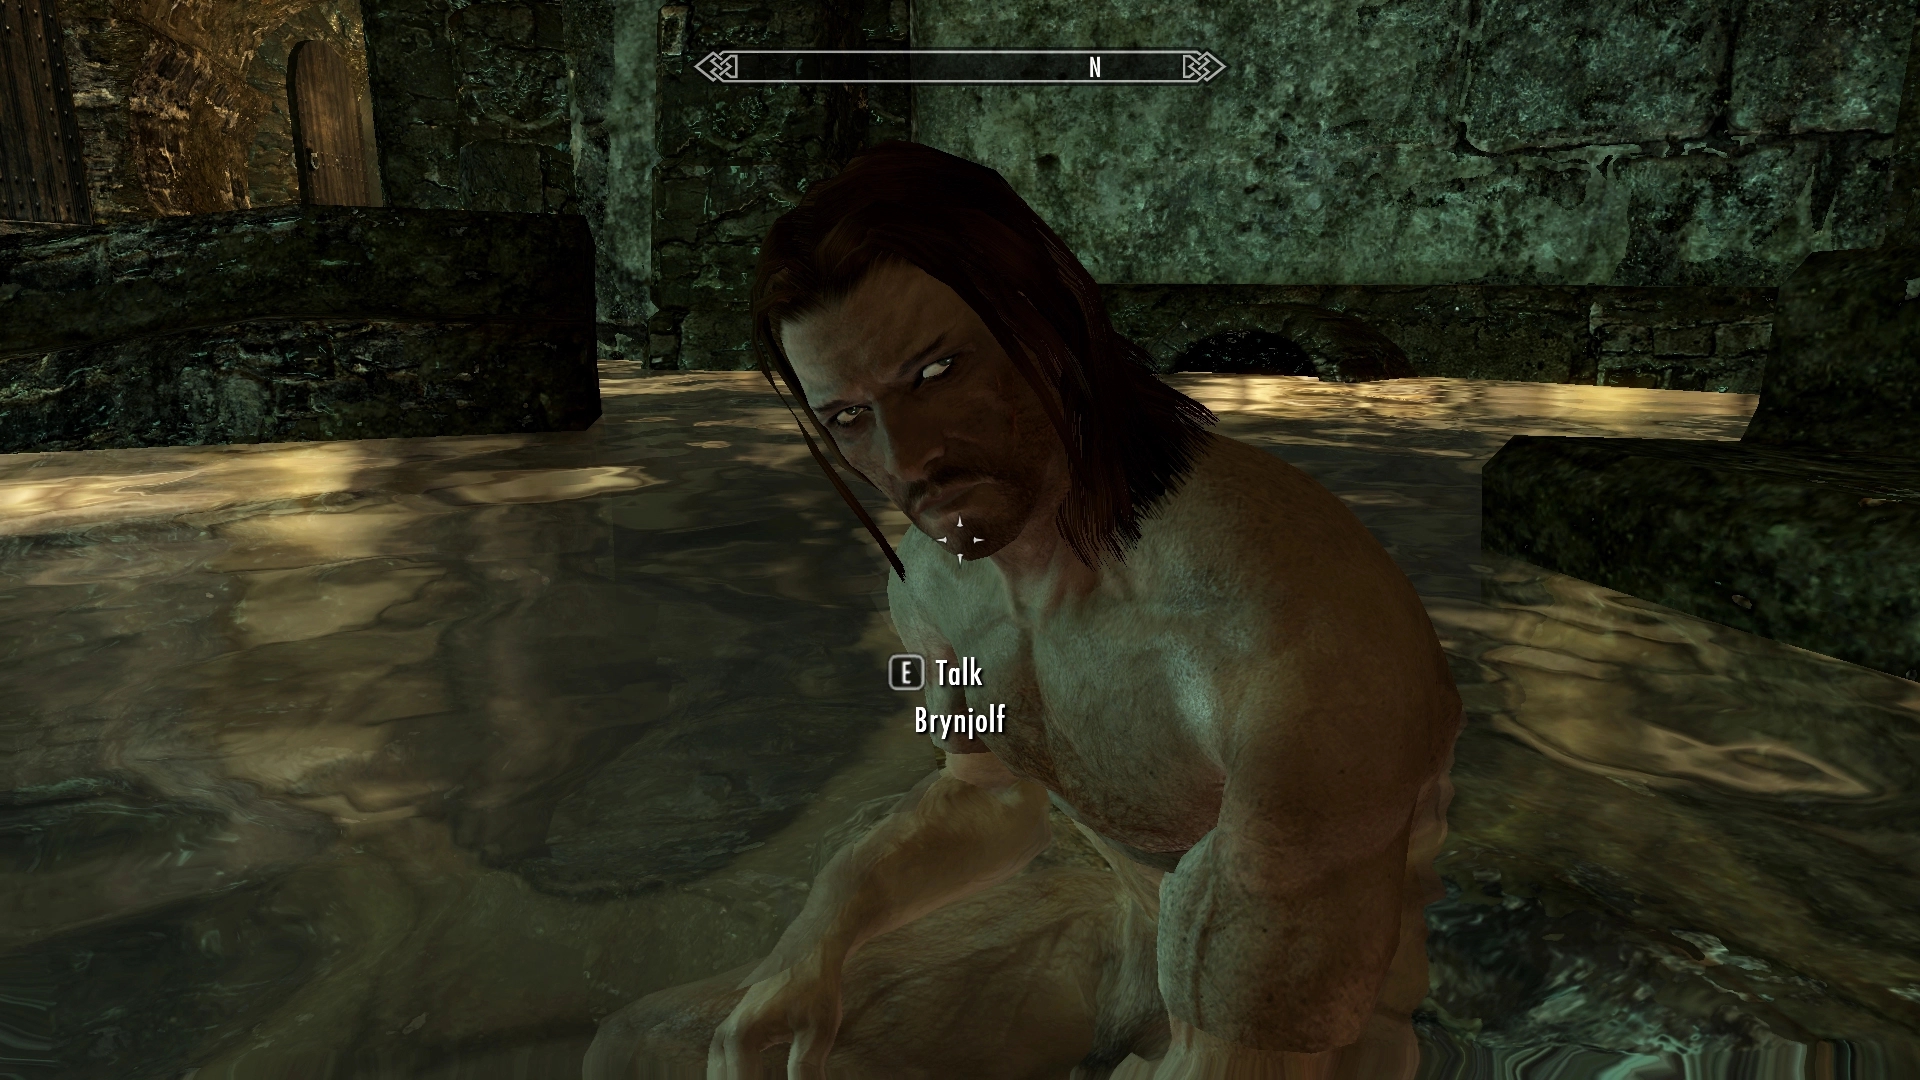 bryan sequeira recommends best skyrim romance mods pic